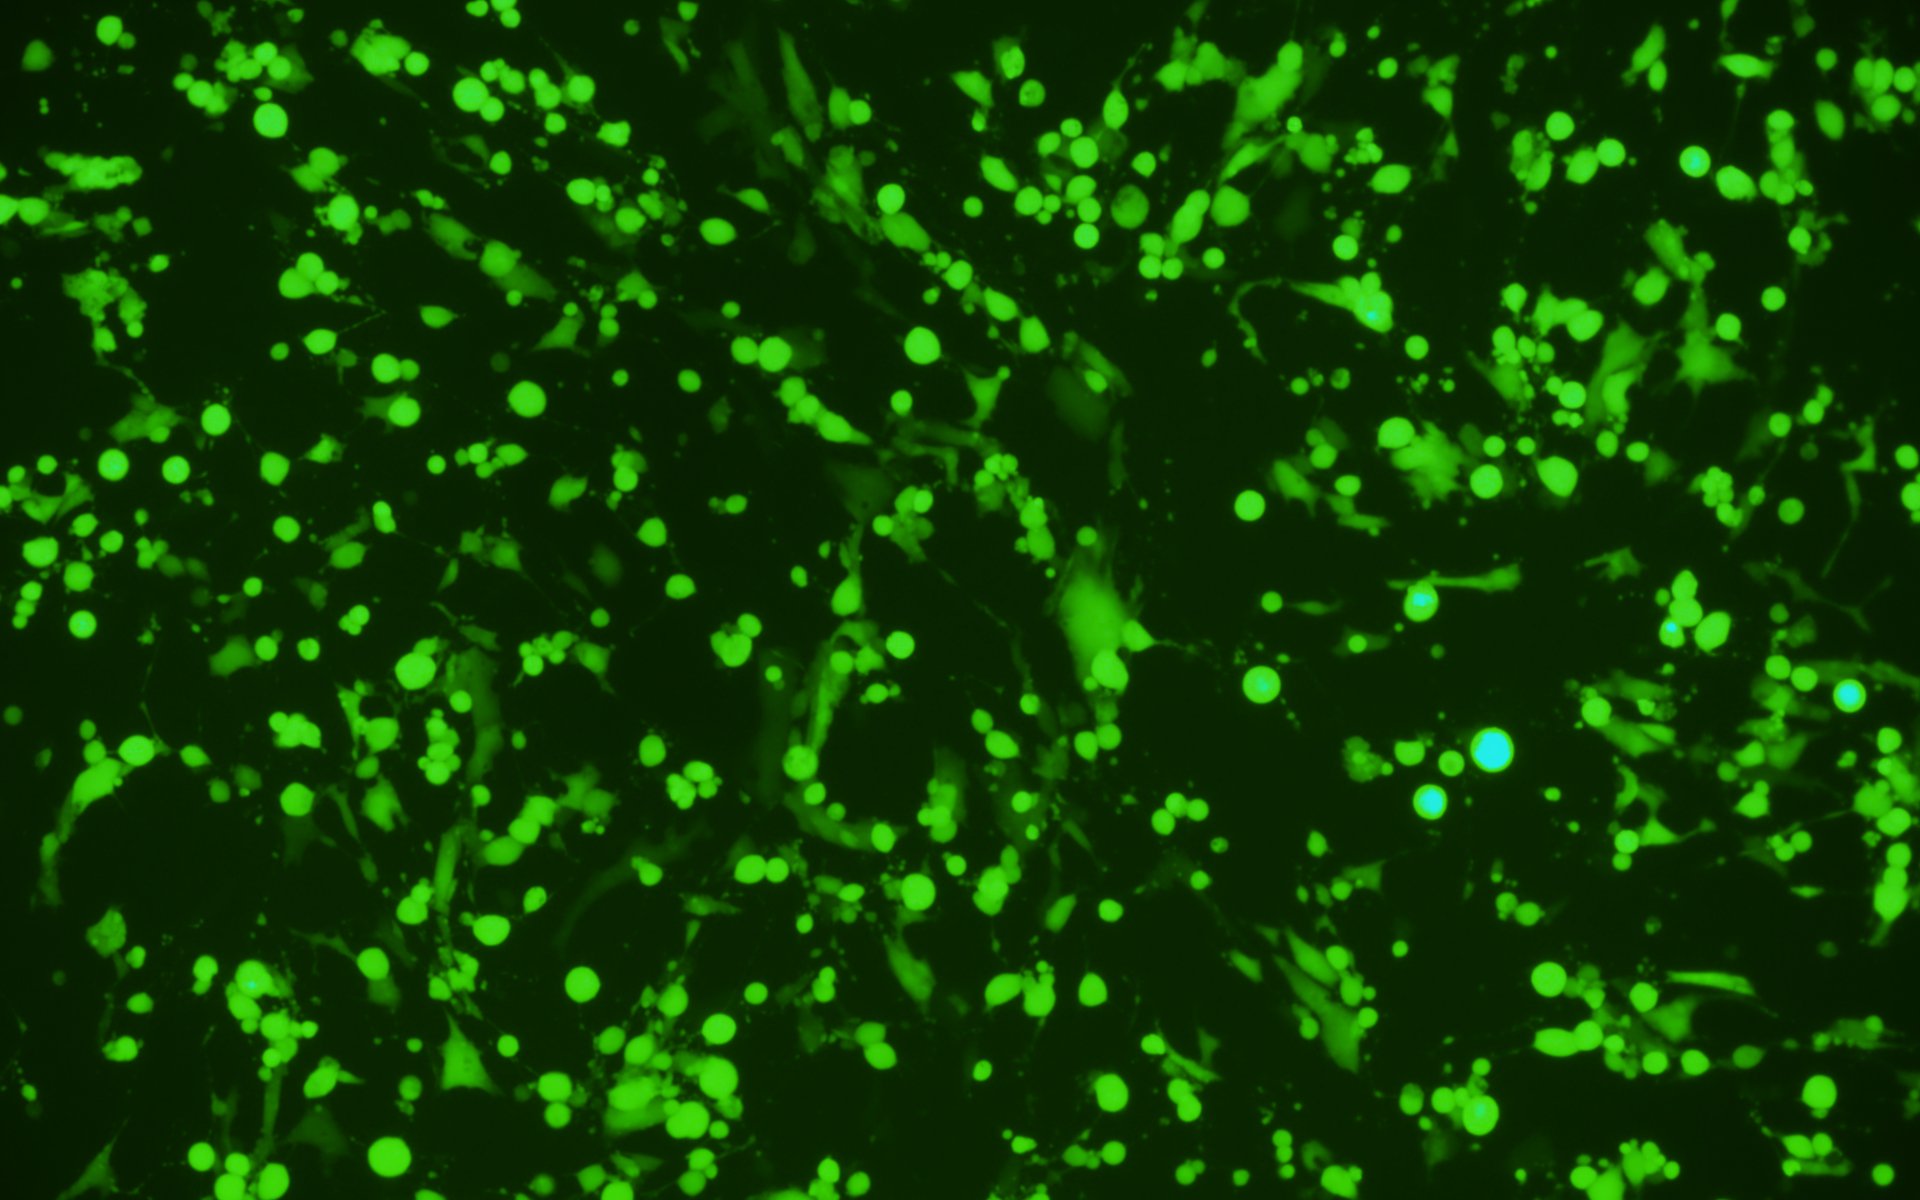 BHK-21-ACE2 cells were infected by SARS-CoV-2 S (D614G mutant) - pseudotyped VSV and presented strong EGFP fluorescent signal.